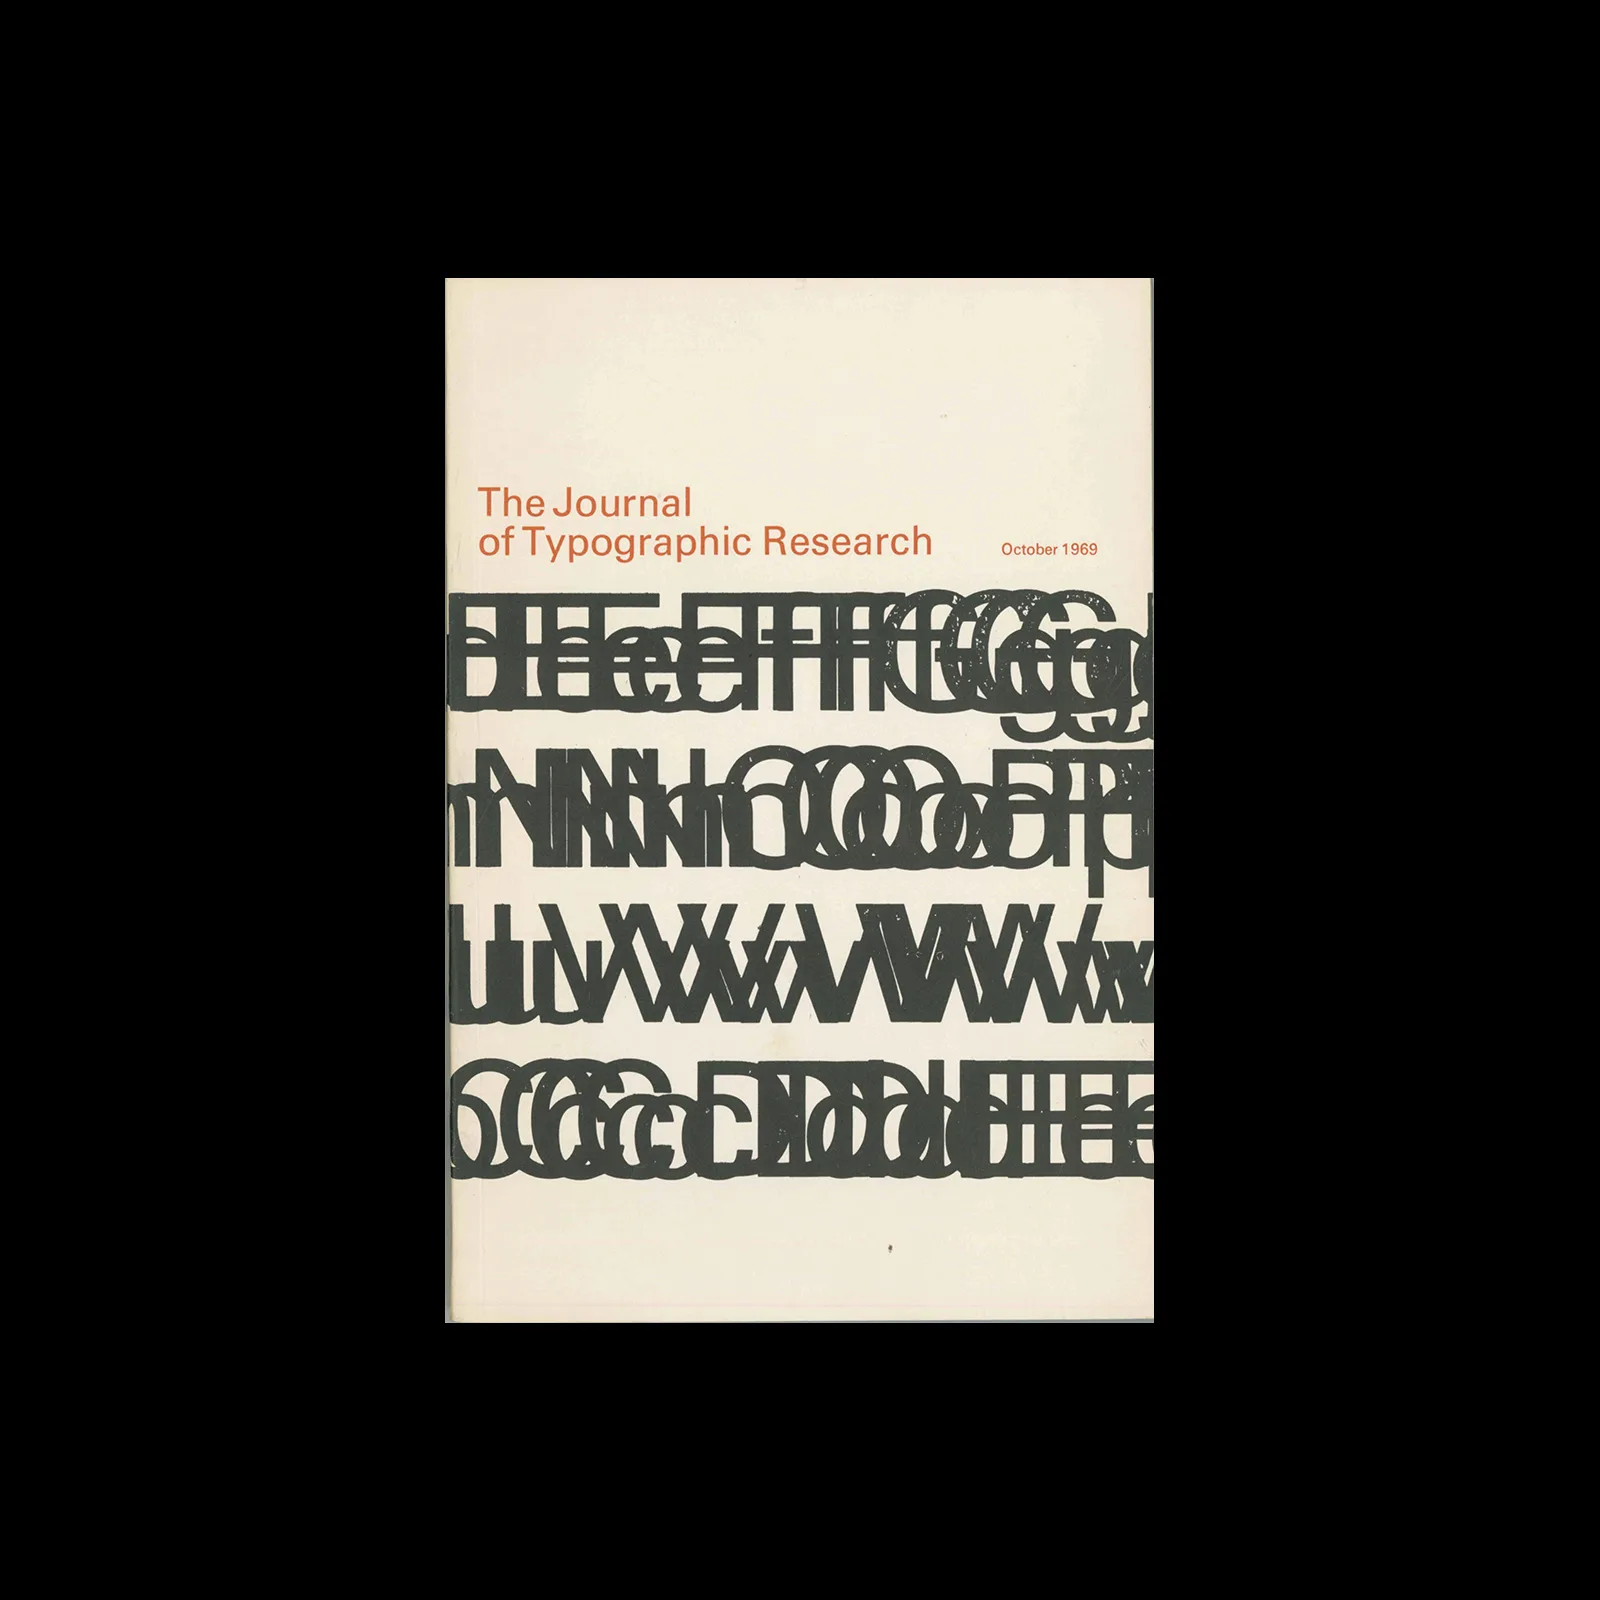 Visible Language (The Journal of Typographic Research, Vol 03, 04, October 1969